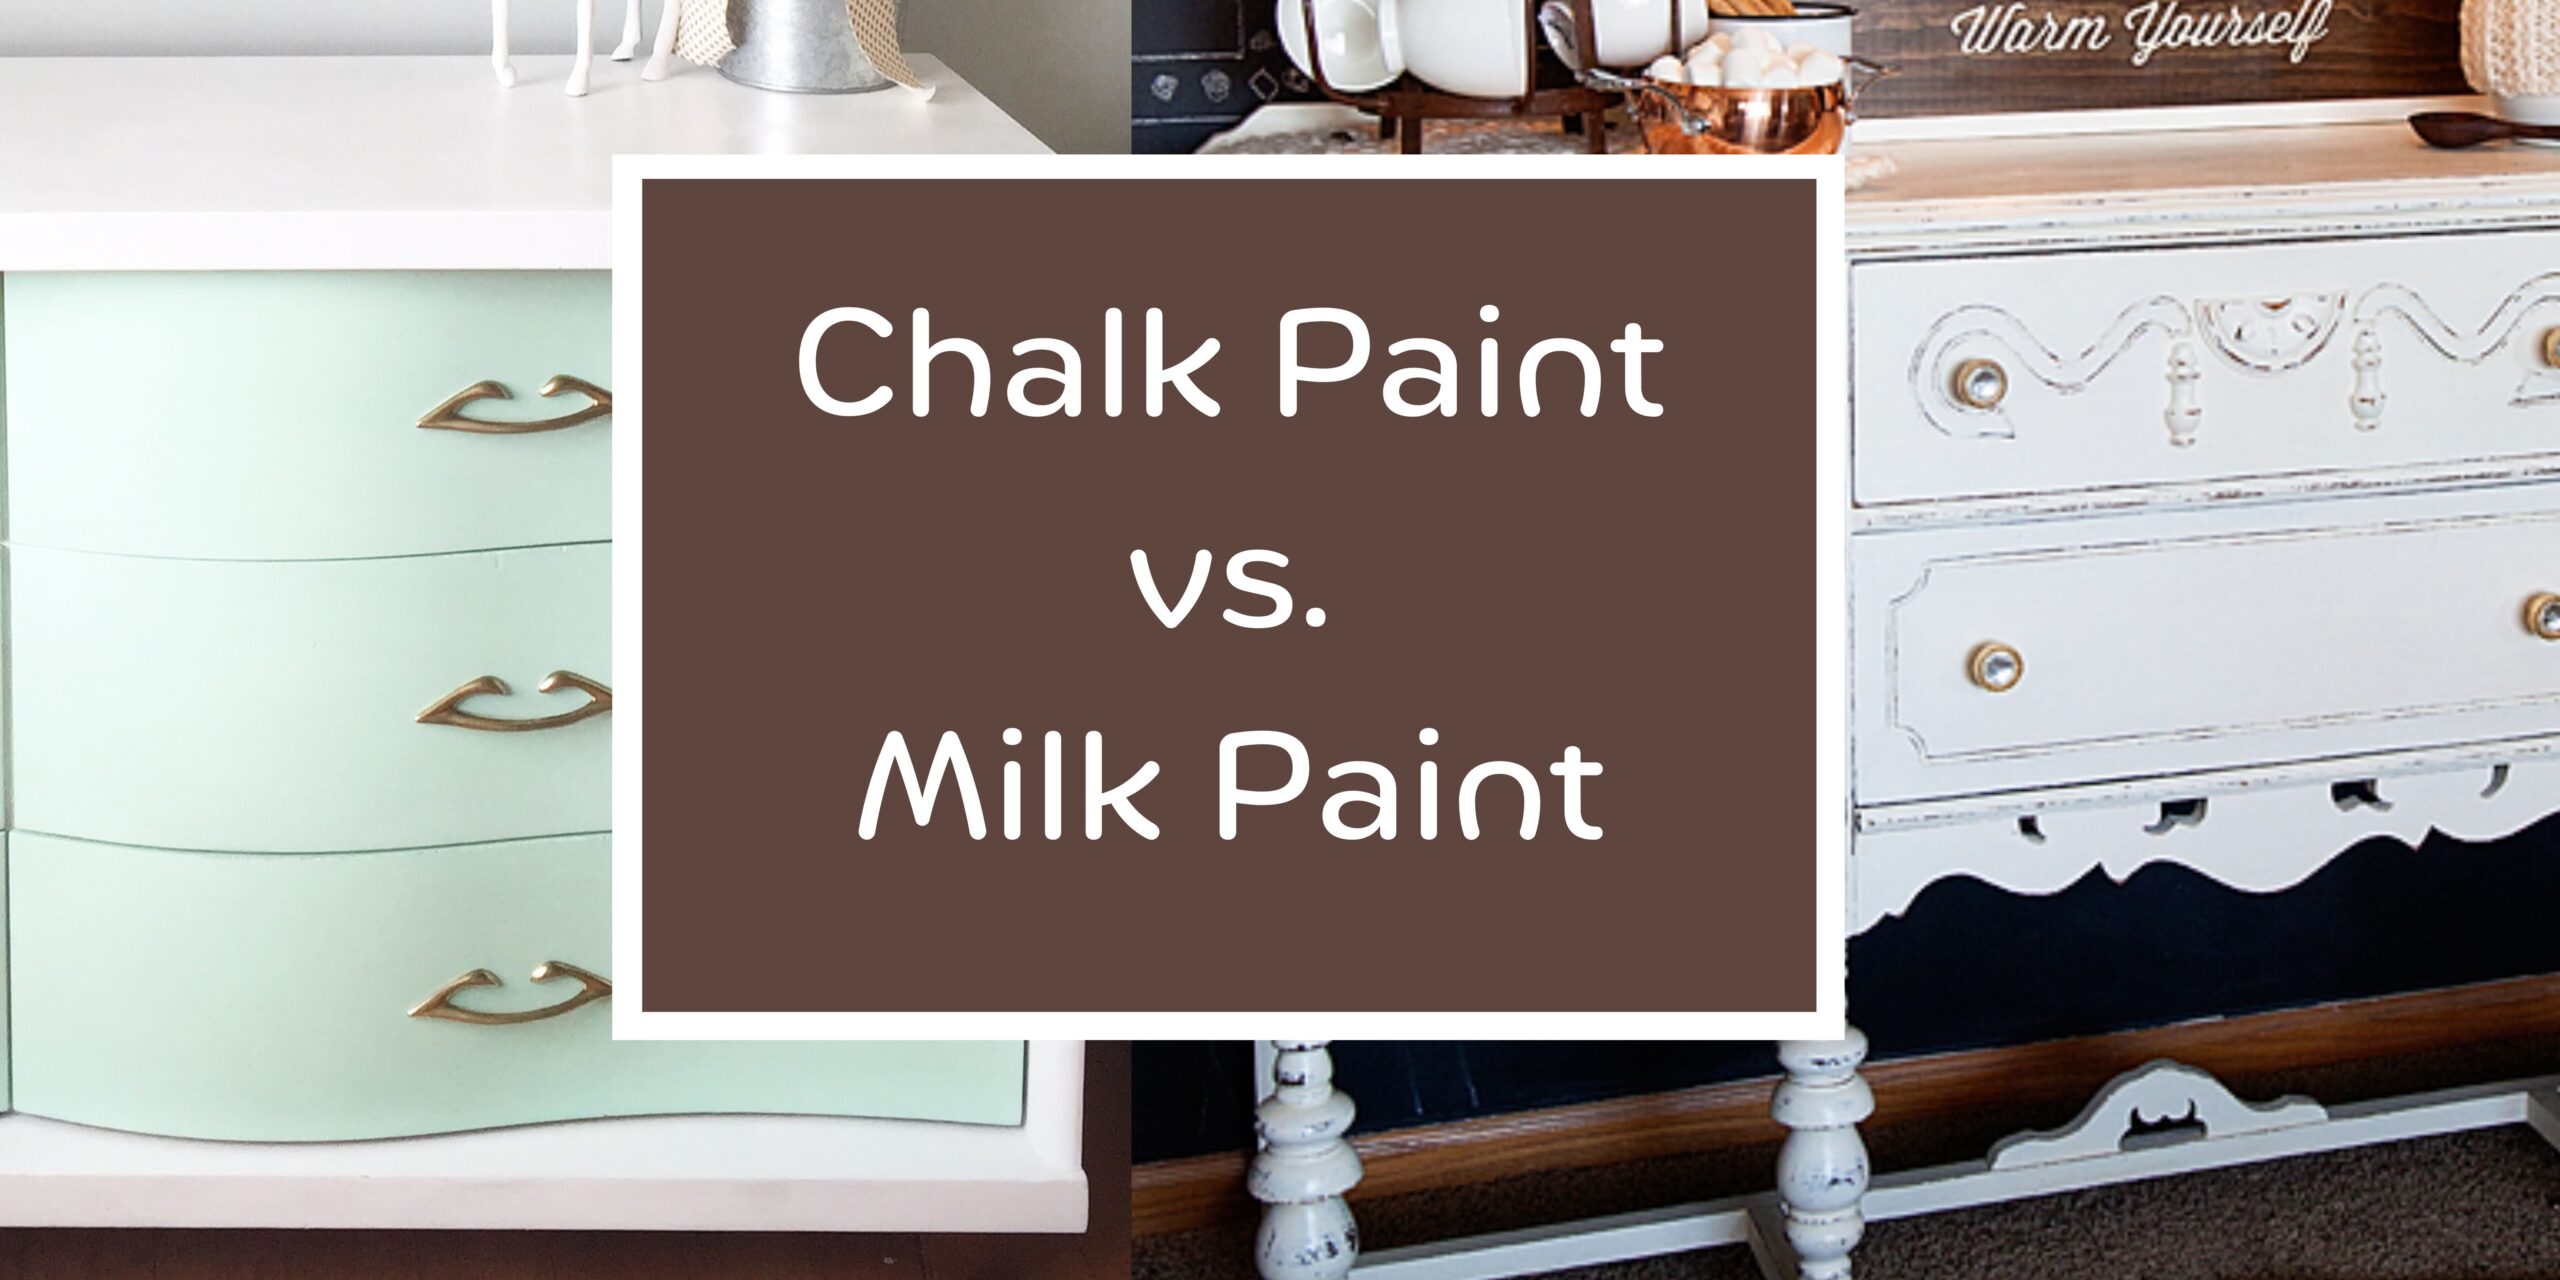 Why You Should Keep Chalk in Your Kitchen